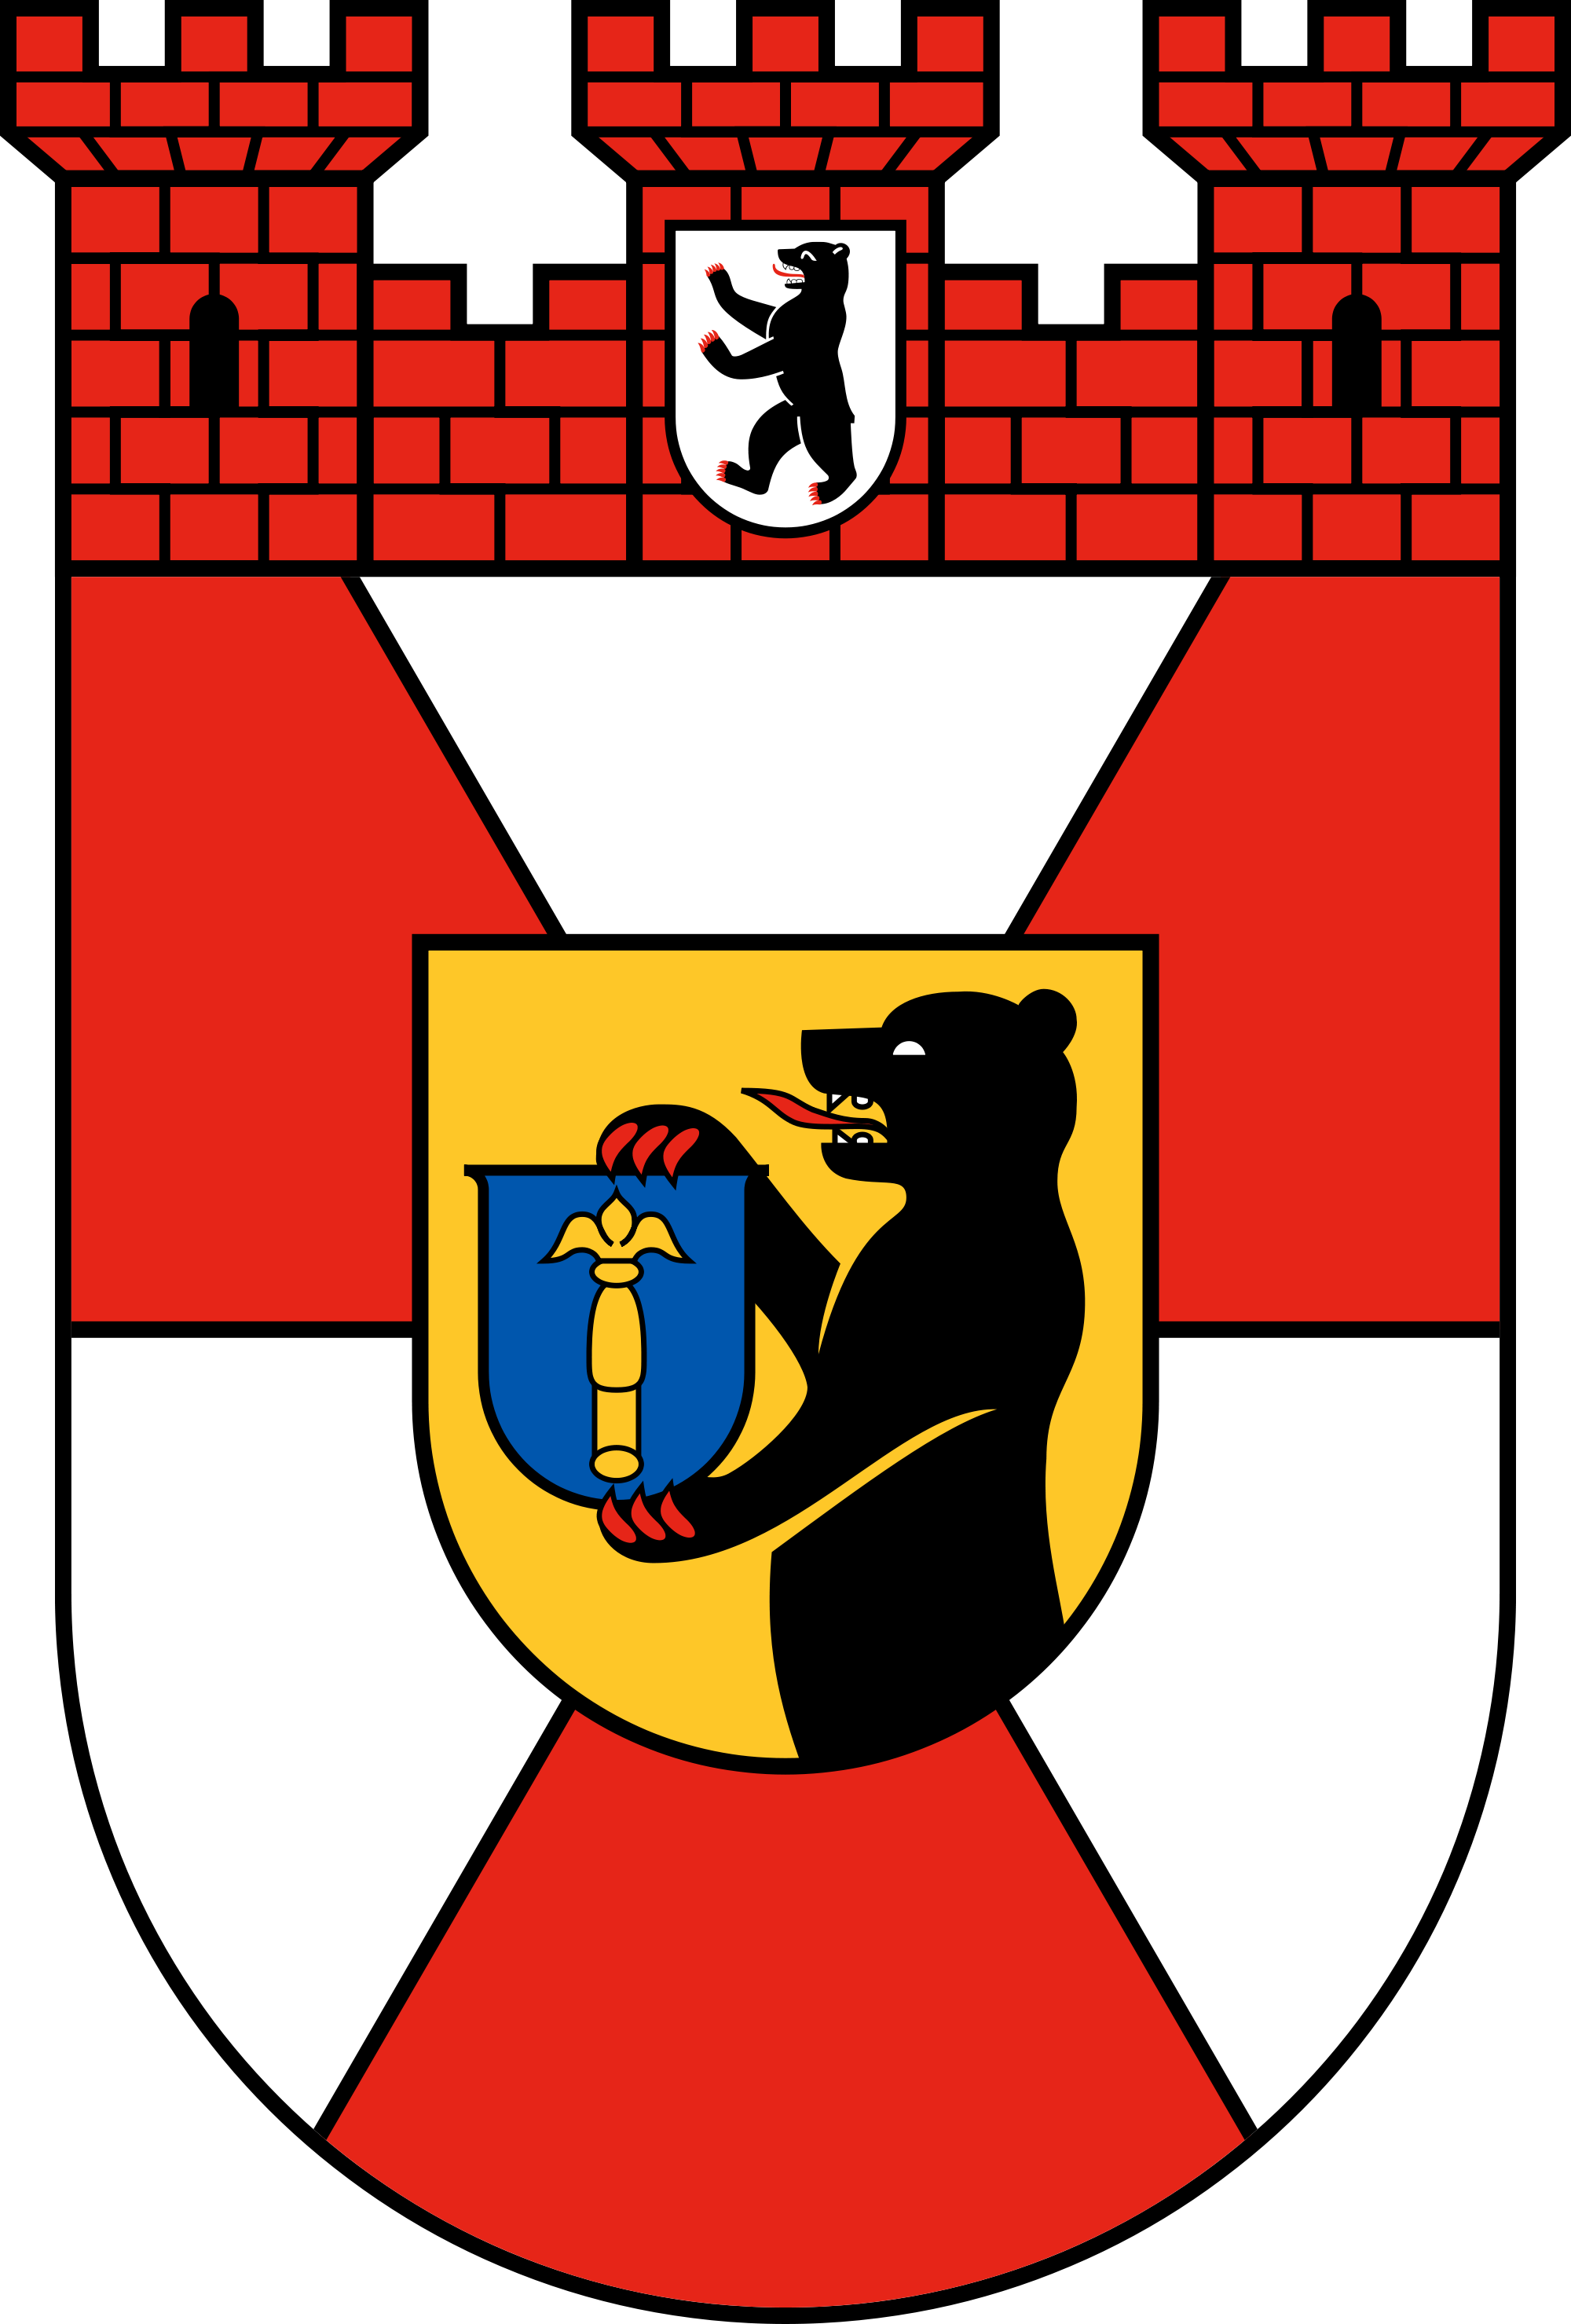 Wappen -Quelle: https://upload.wikimedia.org/wikipedia/commons/thumb/a/a0/Coat_of_arms_of_borough_Mitte.svg/2000px-Coat_of_arms_of_borough_Mitte.svg.png